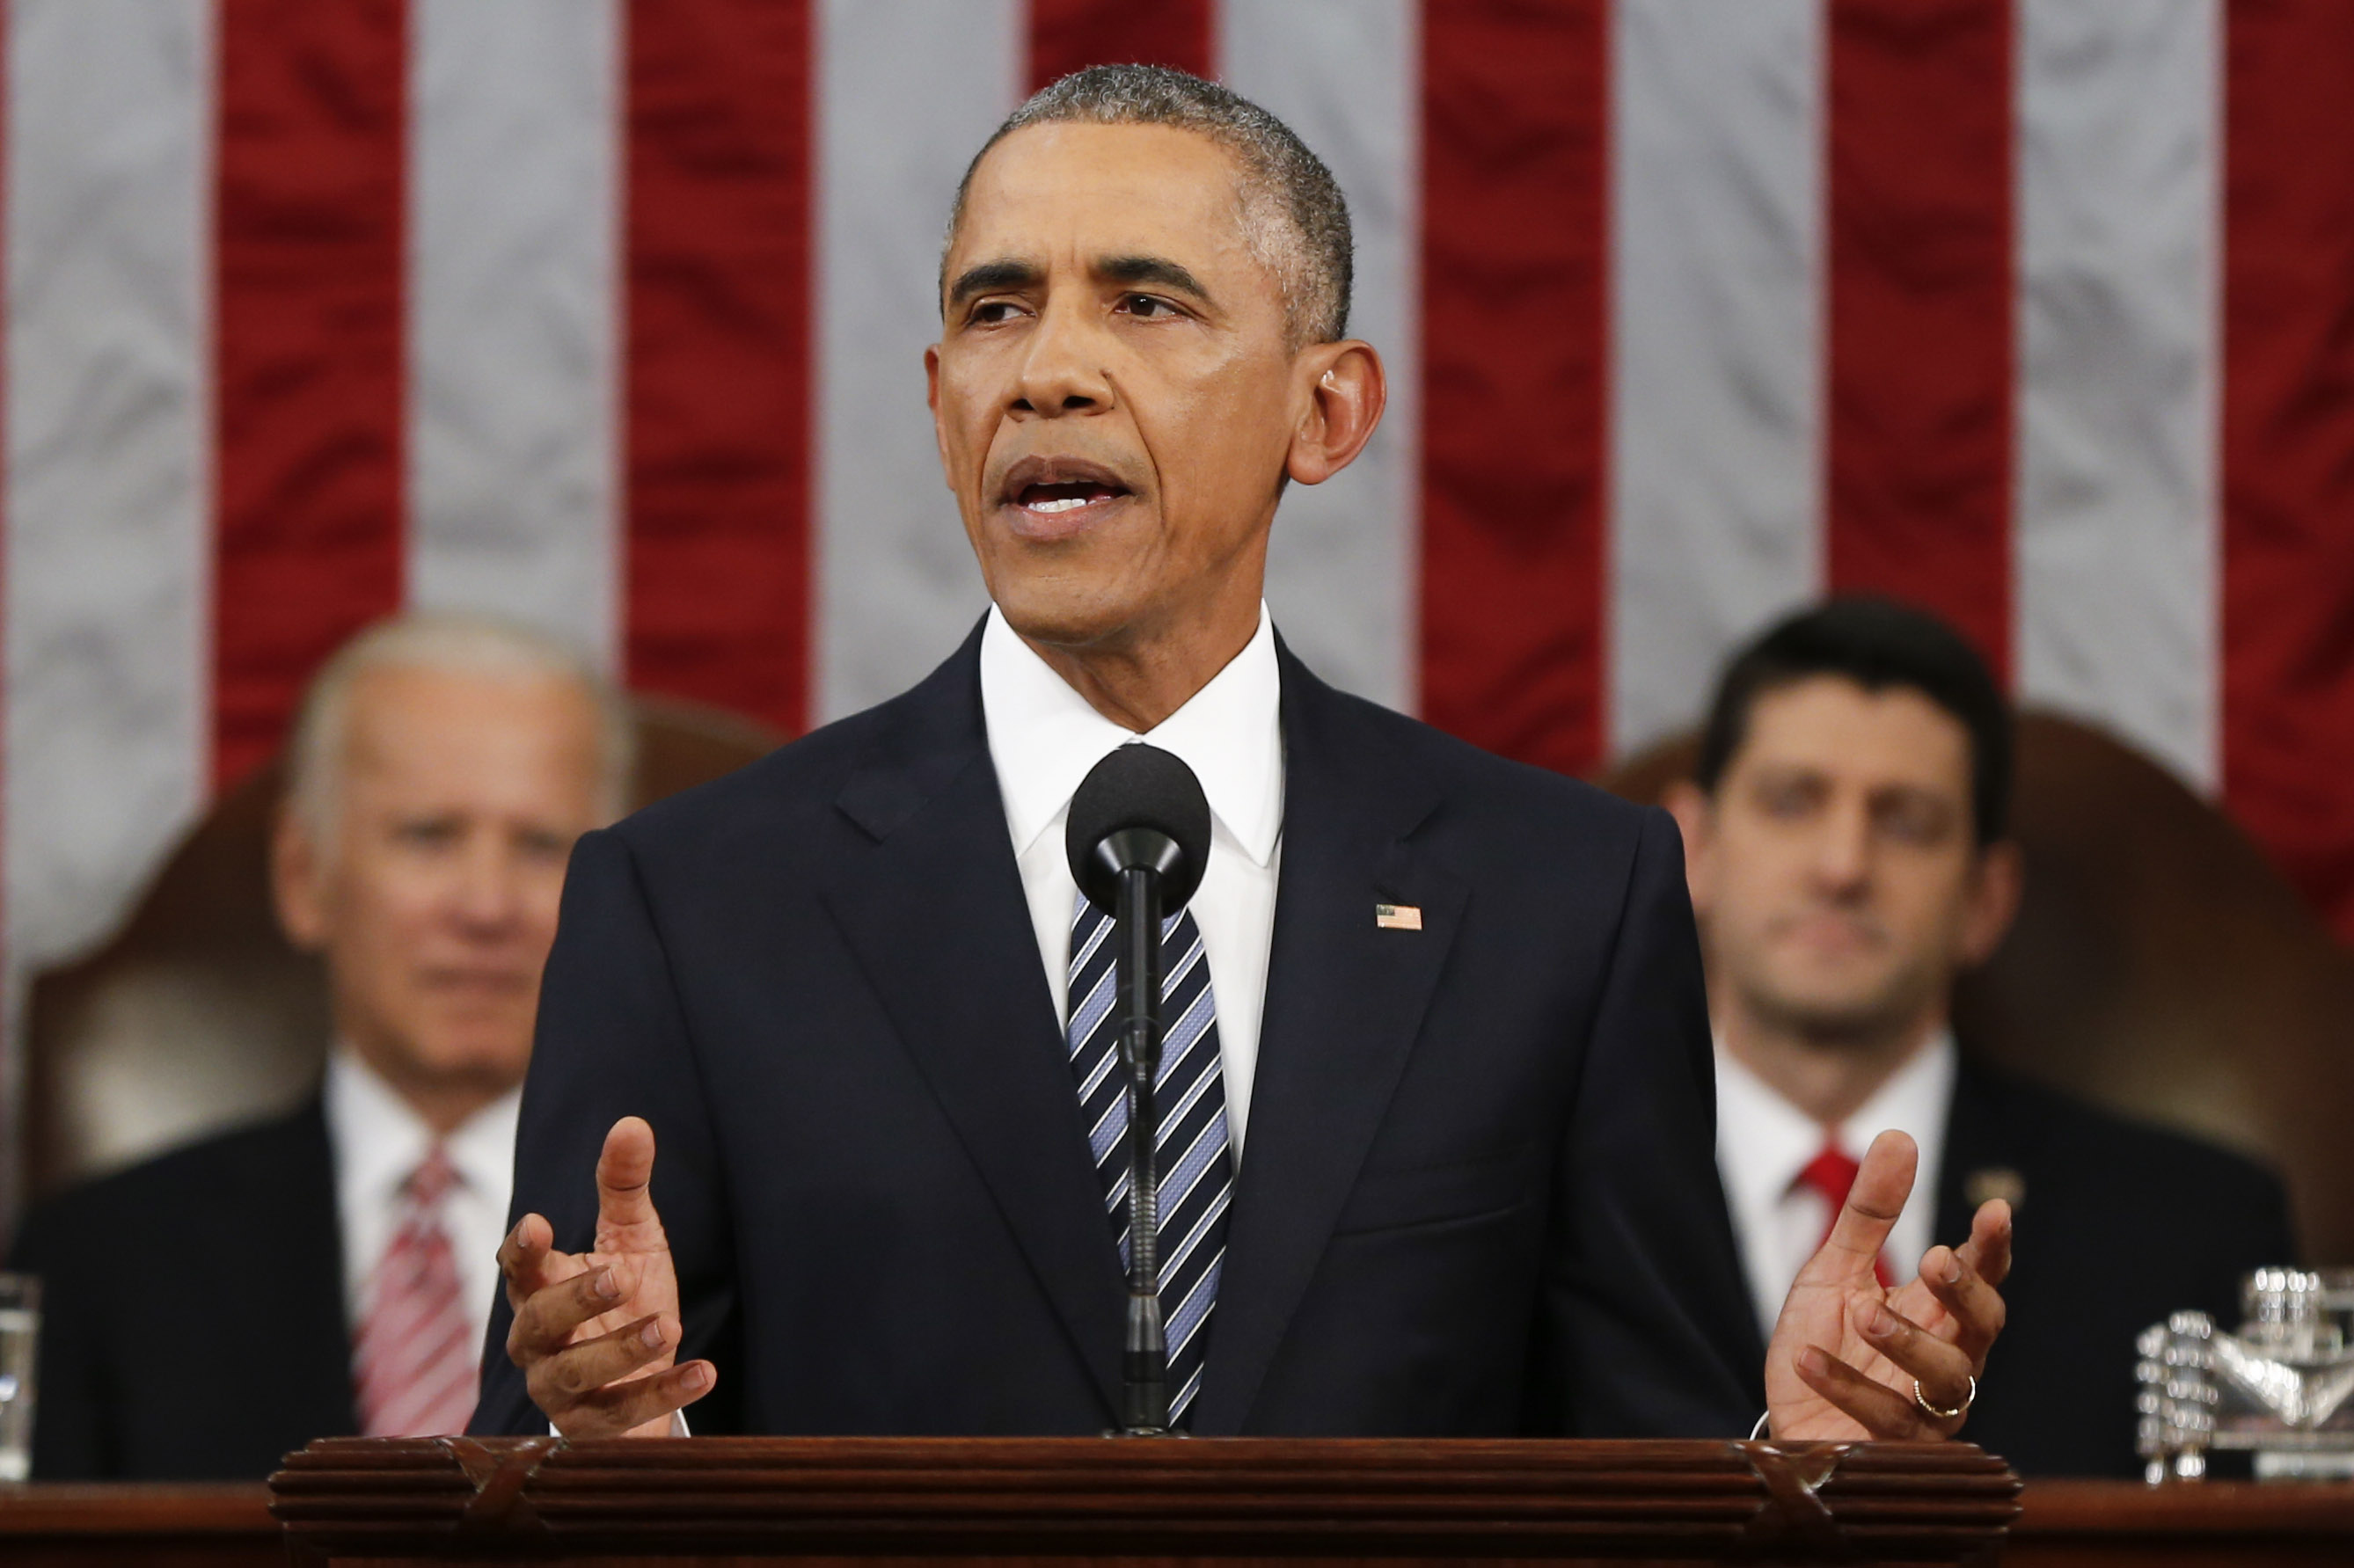 President Barack Obama delivers his State of the Union address before a joint session of Congress on Capitol Hill in Washington, D.C., on Jan. 12, 2016. (Evan Vucci — Pool/Getty Images)